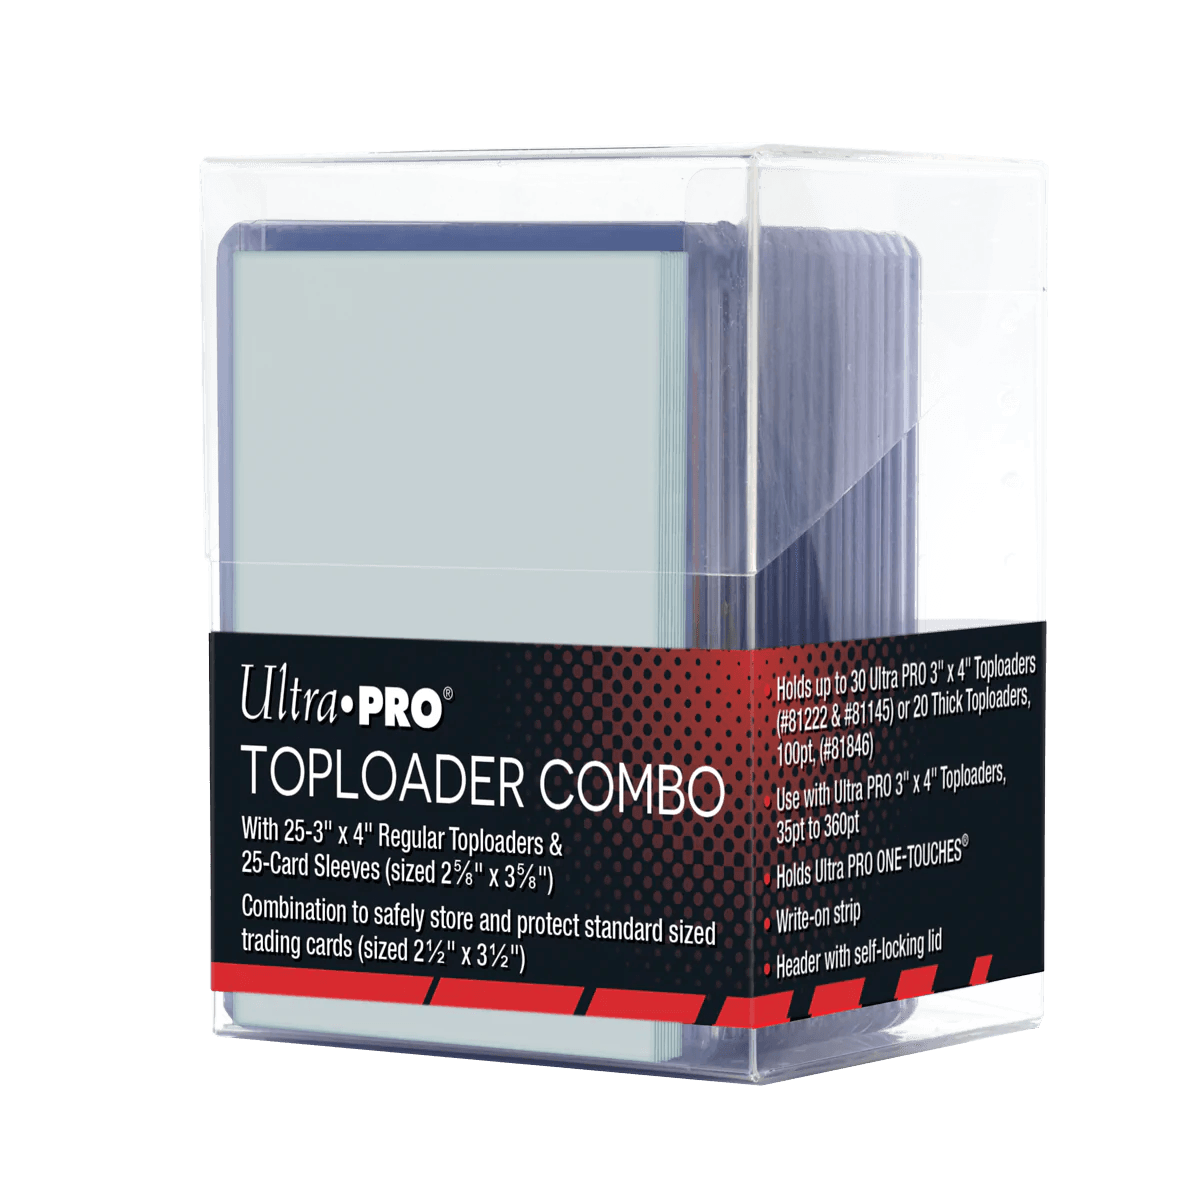 Ultra PRO - Toploader Combo - 035pt - Plastic box & toploaders/sleeves (Qty:25) - Hobby Champion Inc